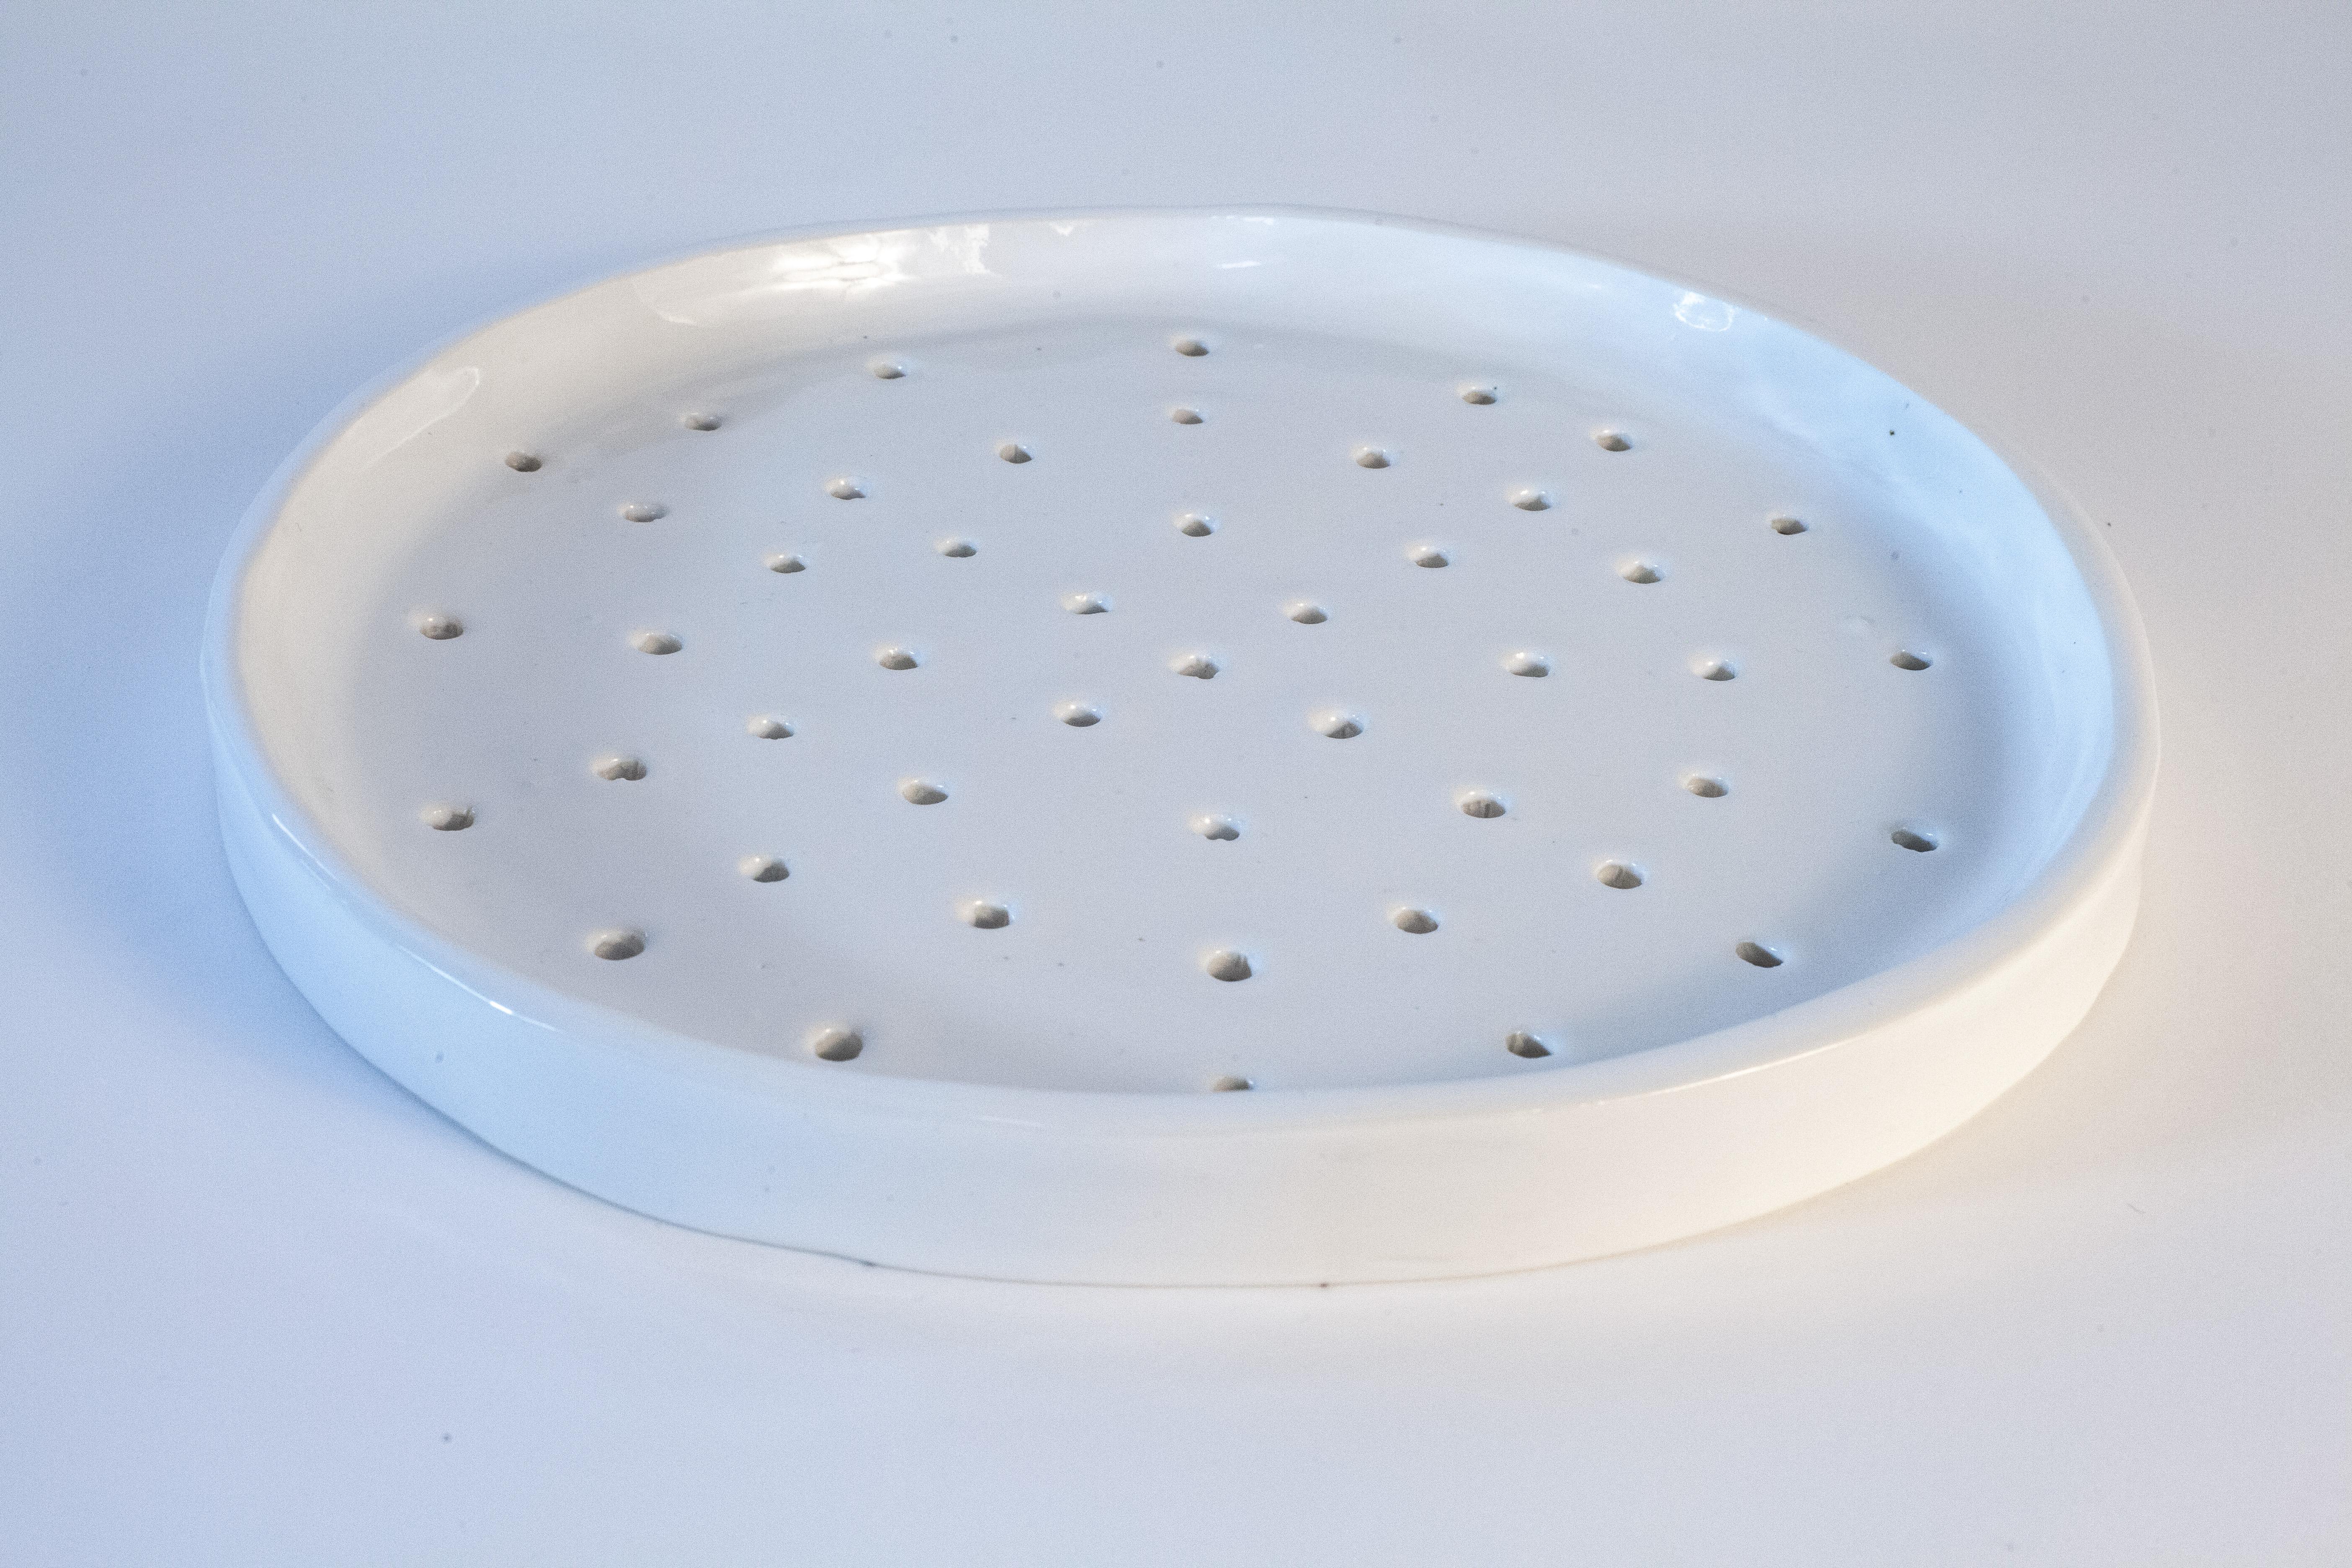 Hand-build porcelain sieve / tray by Danish artist, Christine Roland.
An organic shape with a hole pattern and glossy, white glazing
This one-of -a-kind, decorative object is also suitable as tableware: as a tea tray, an herb sieve or for flower